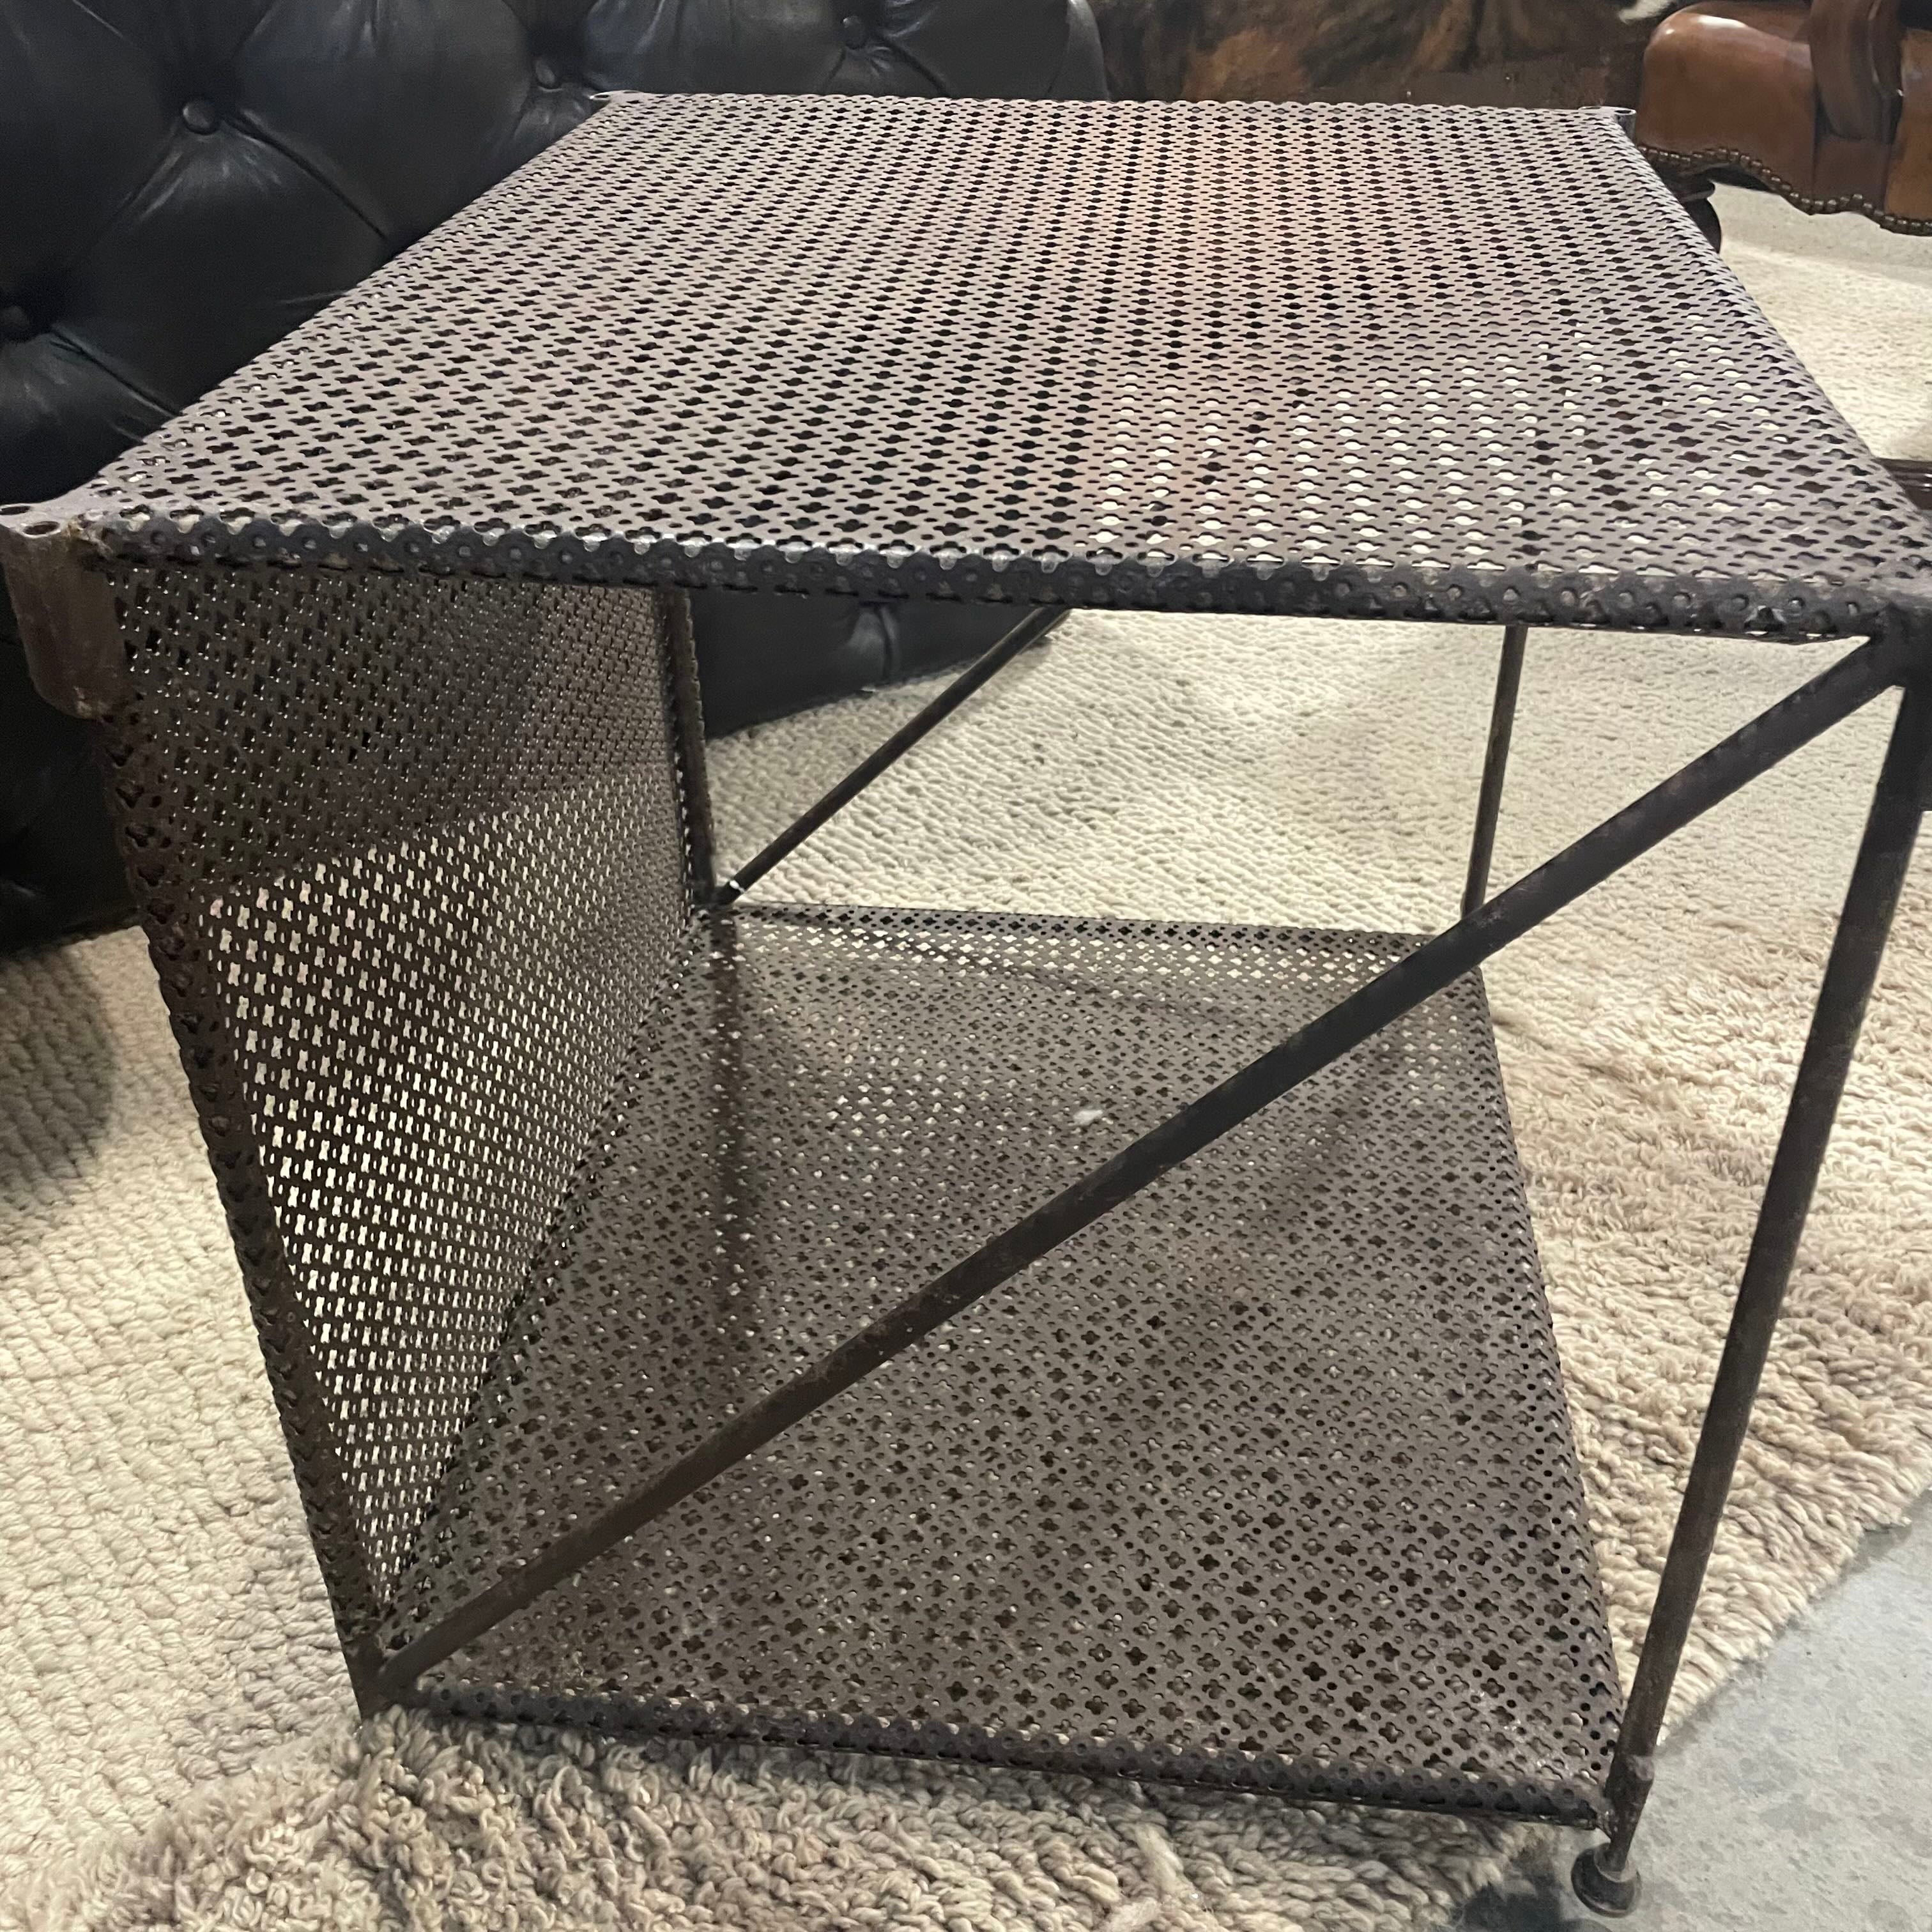 24"x 21"x 19.5" Cross & Dot Punched Rustic Metal Side Bar Accent Table